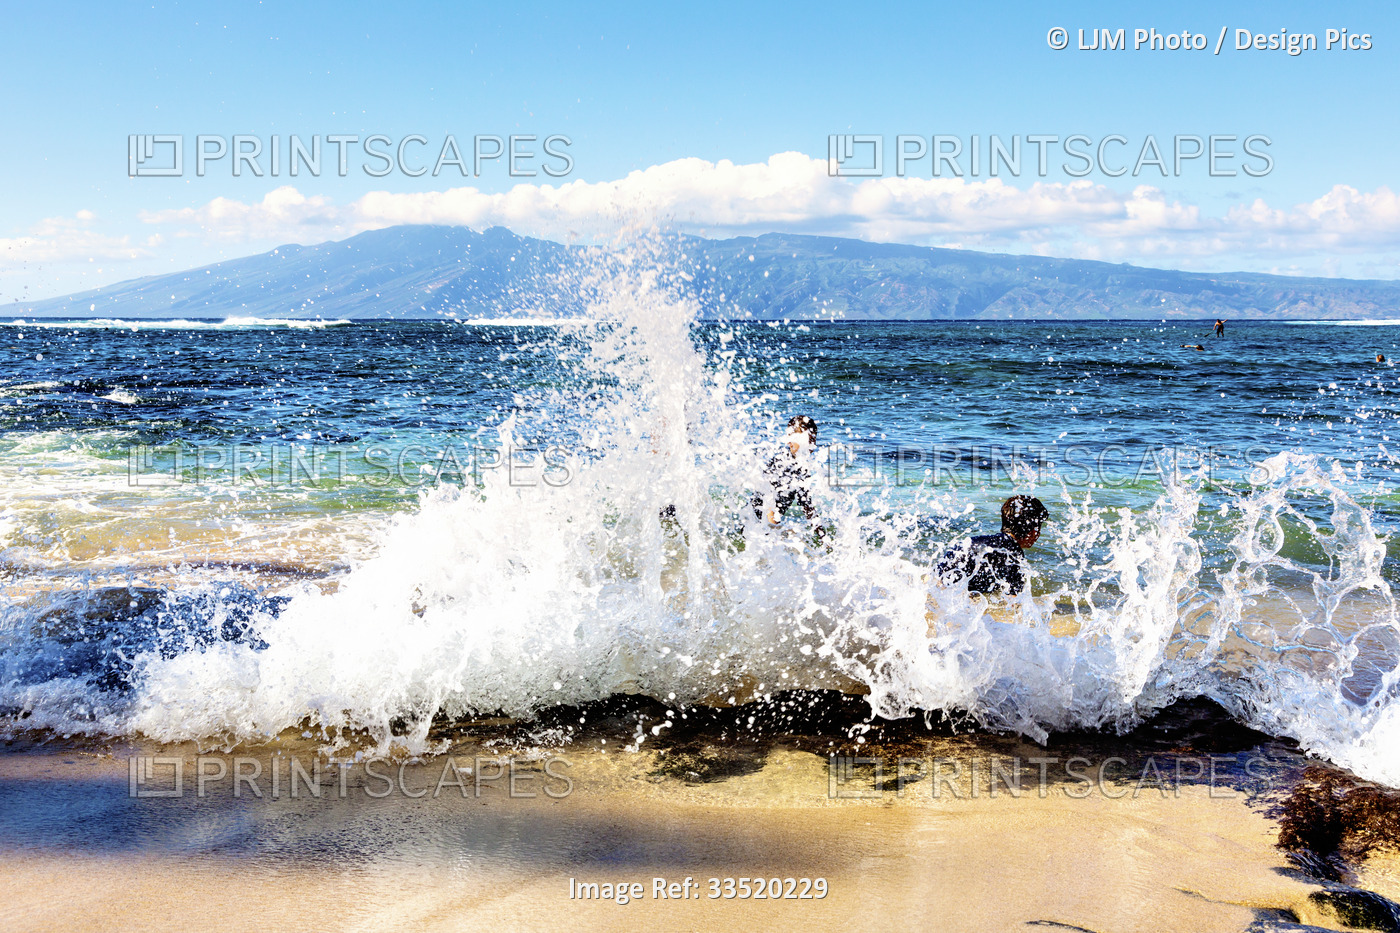 Two young boys playing in the large, breaking waves in the ocean on Kapalua ...